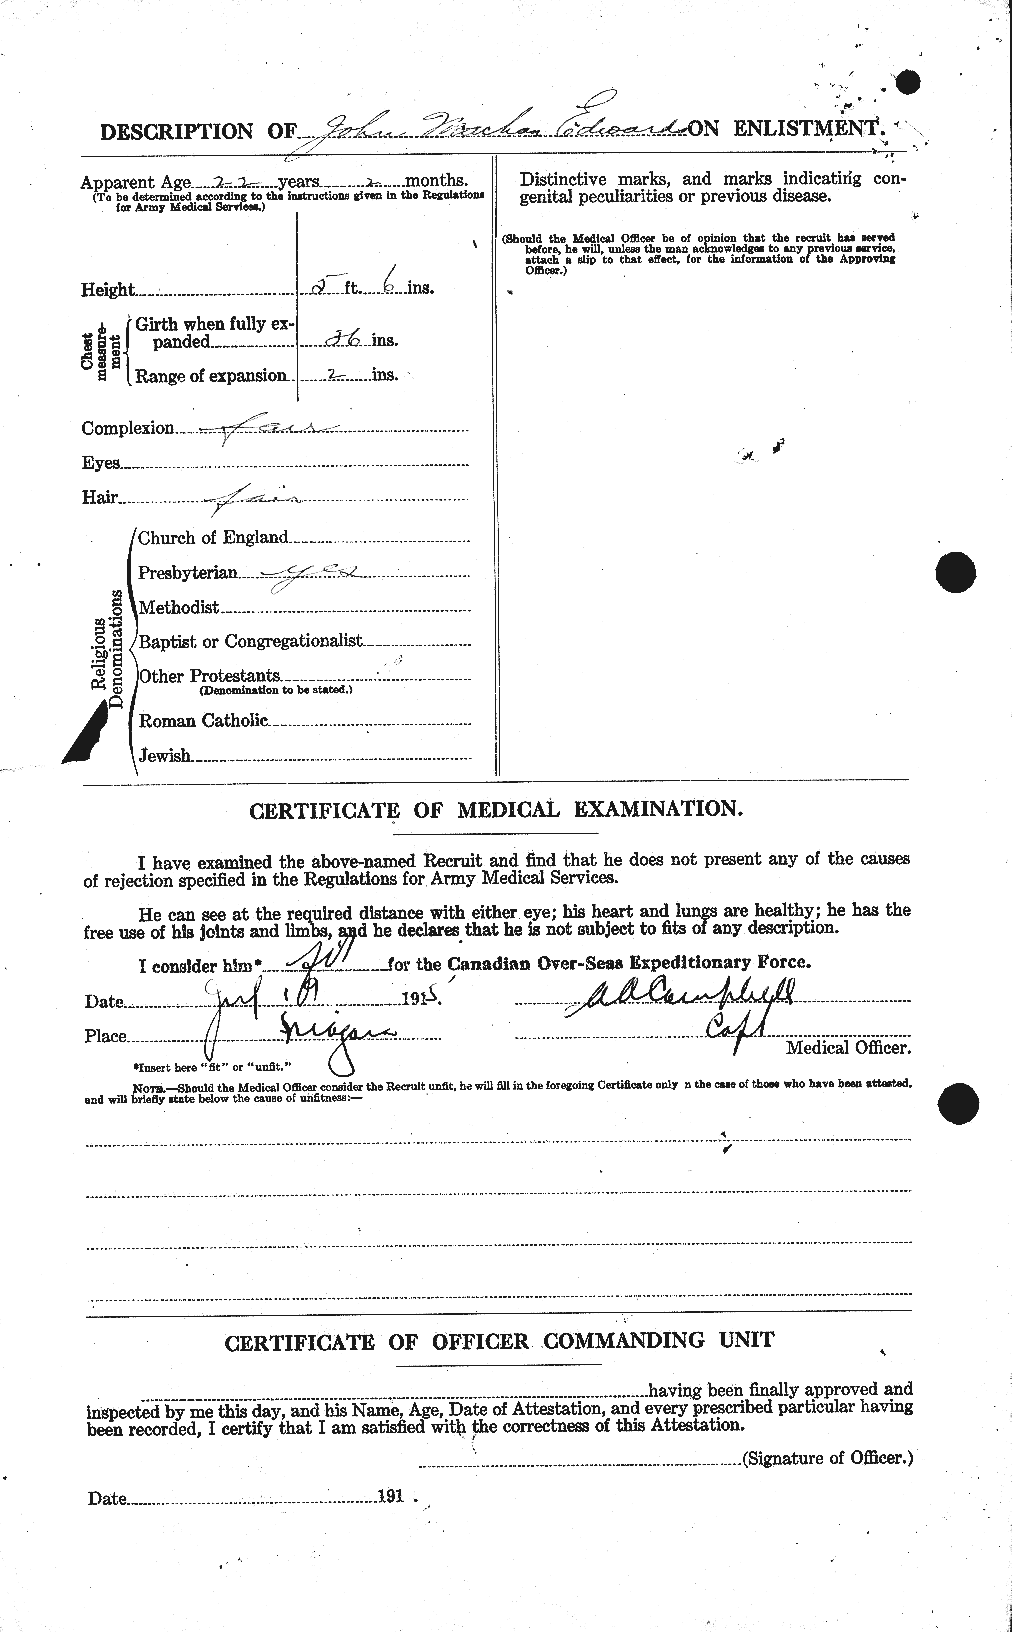 Personnel Records of the First World War - CEF 310149b